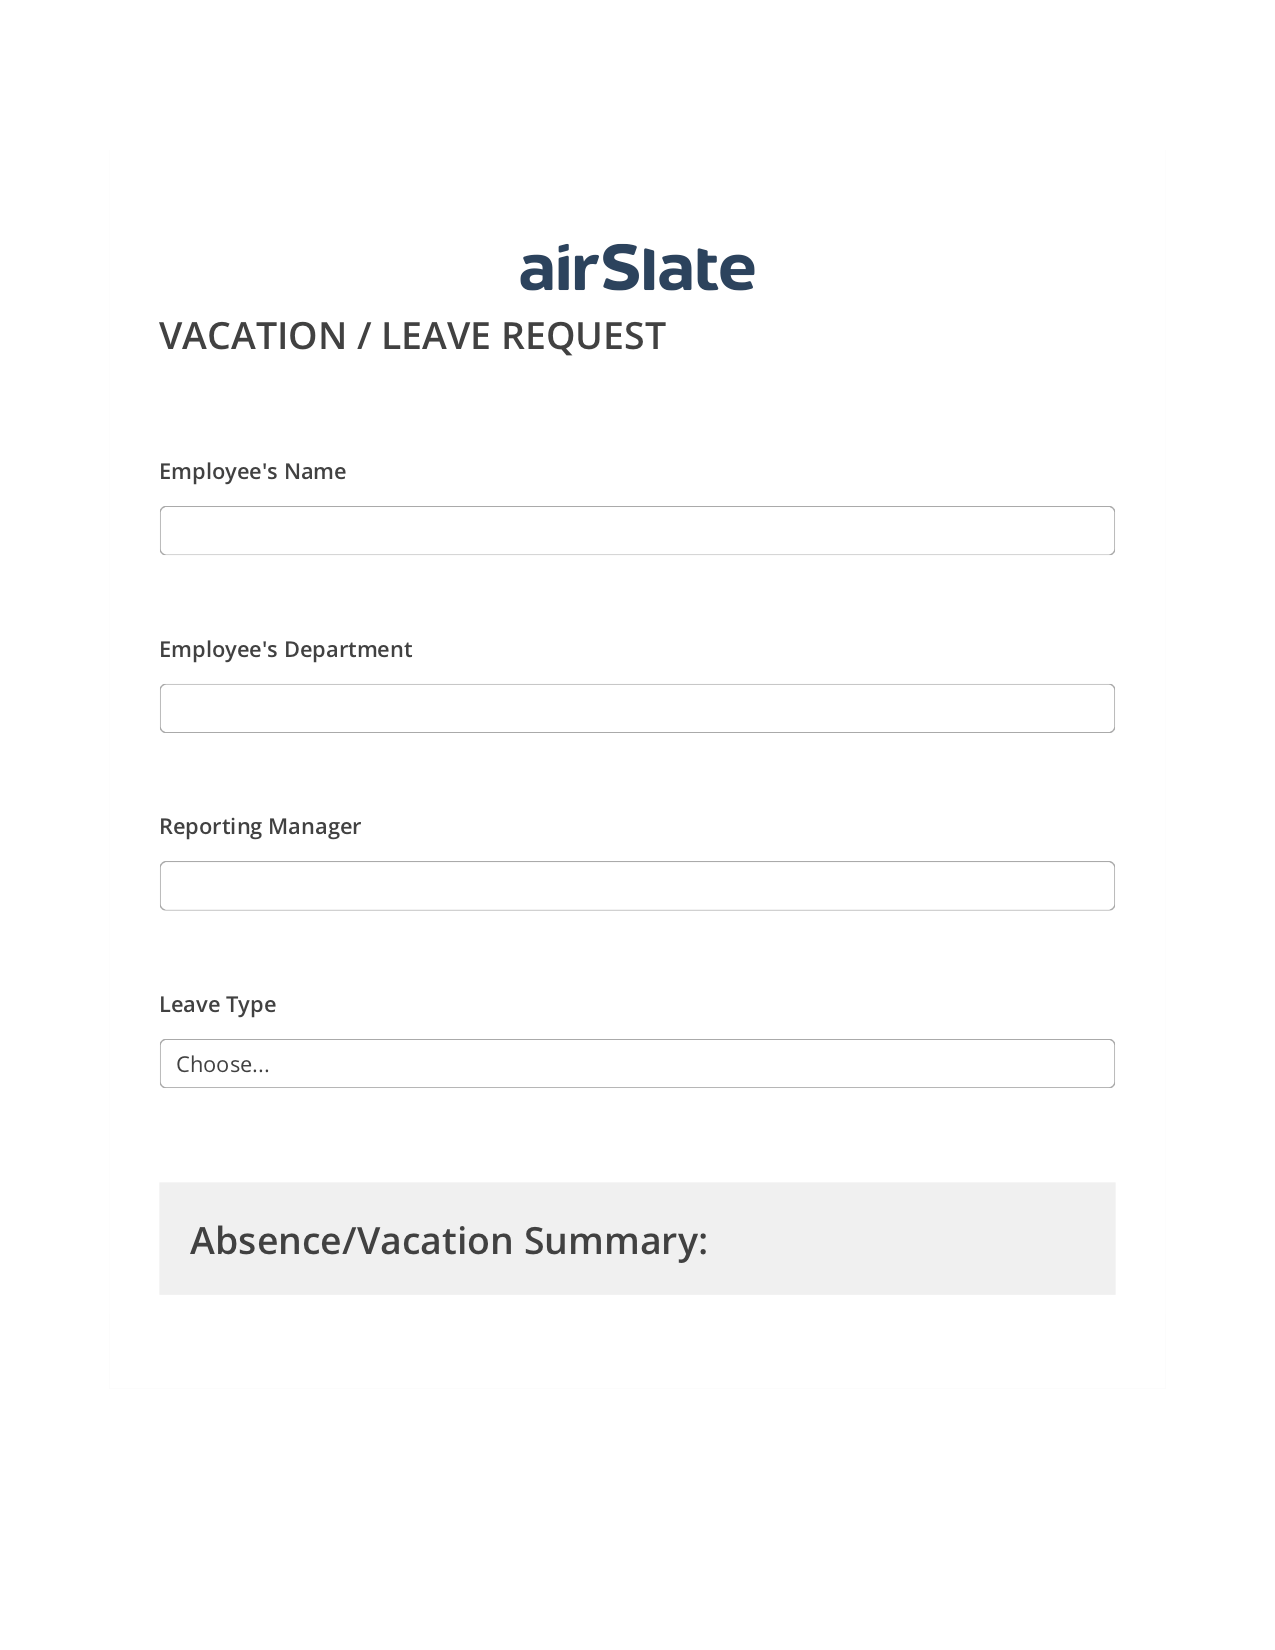 Vacation/Leave Request Flow Mailchimp add recipient to audience Bot